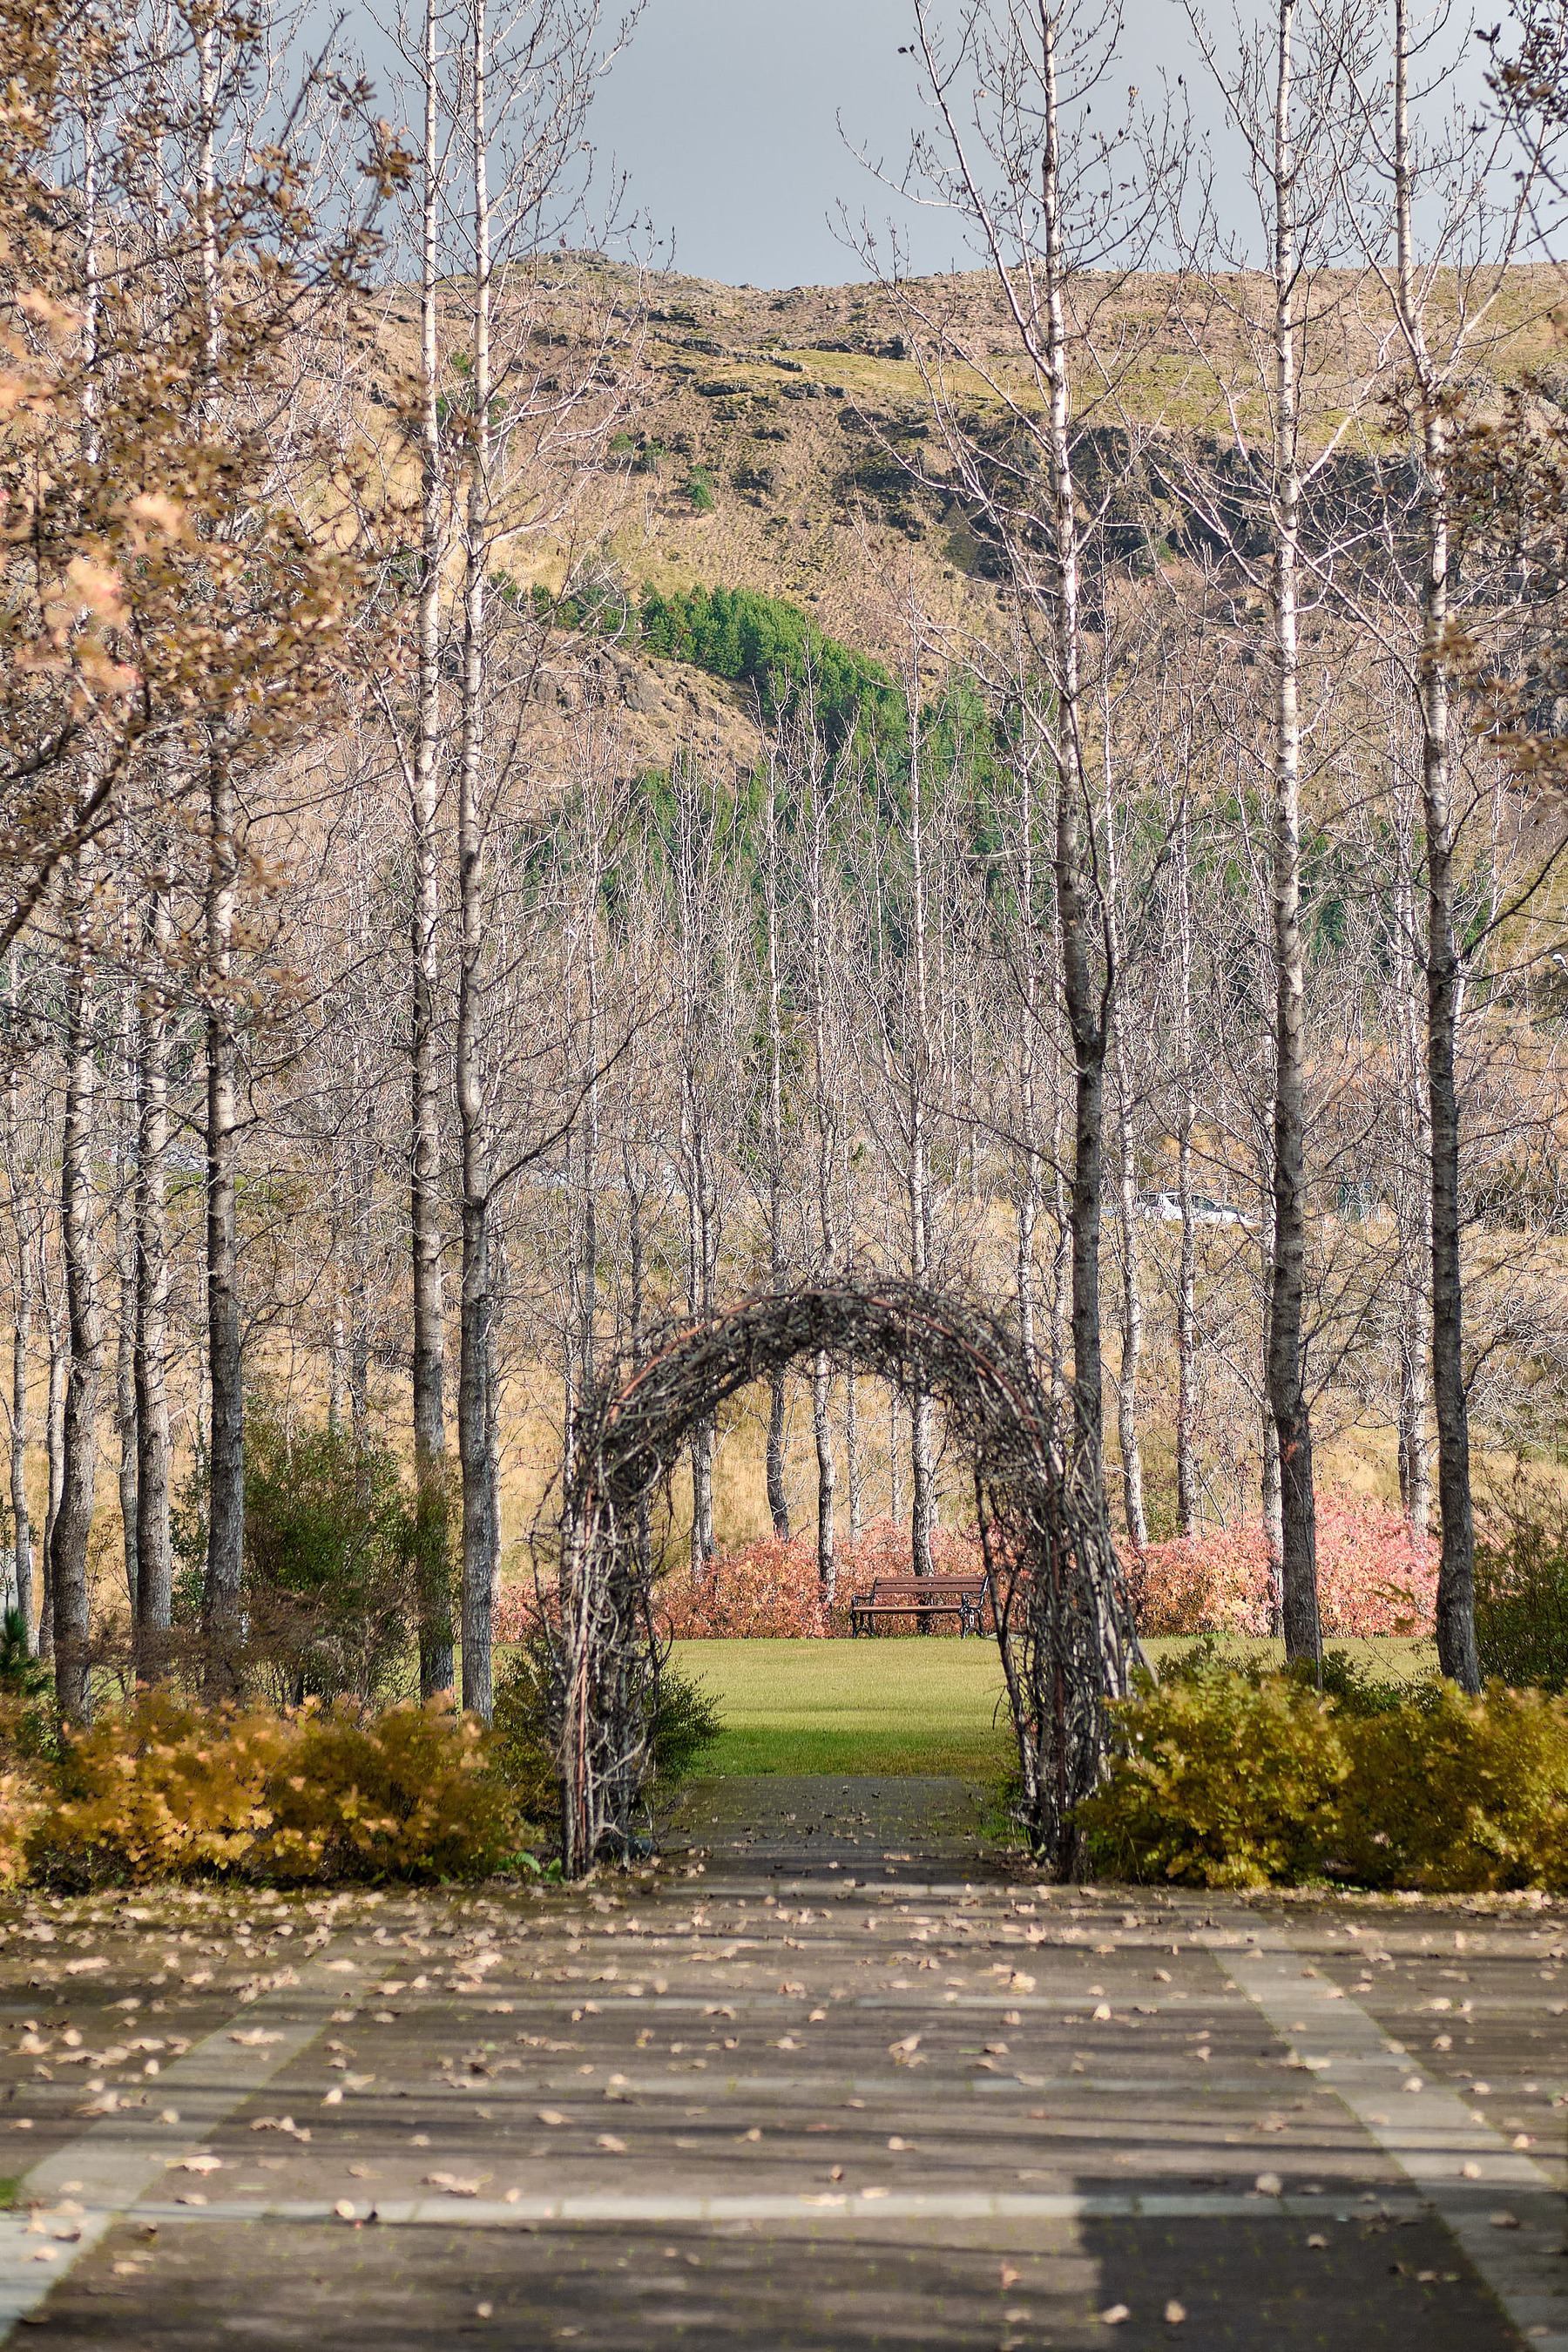 A park bench is visible through a garden arch. Surrounded by fallen autumn leaves.